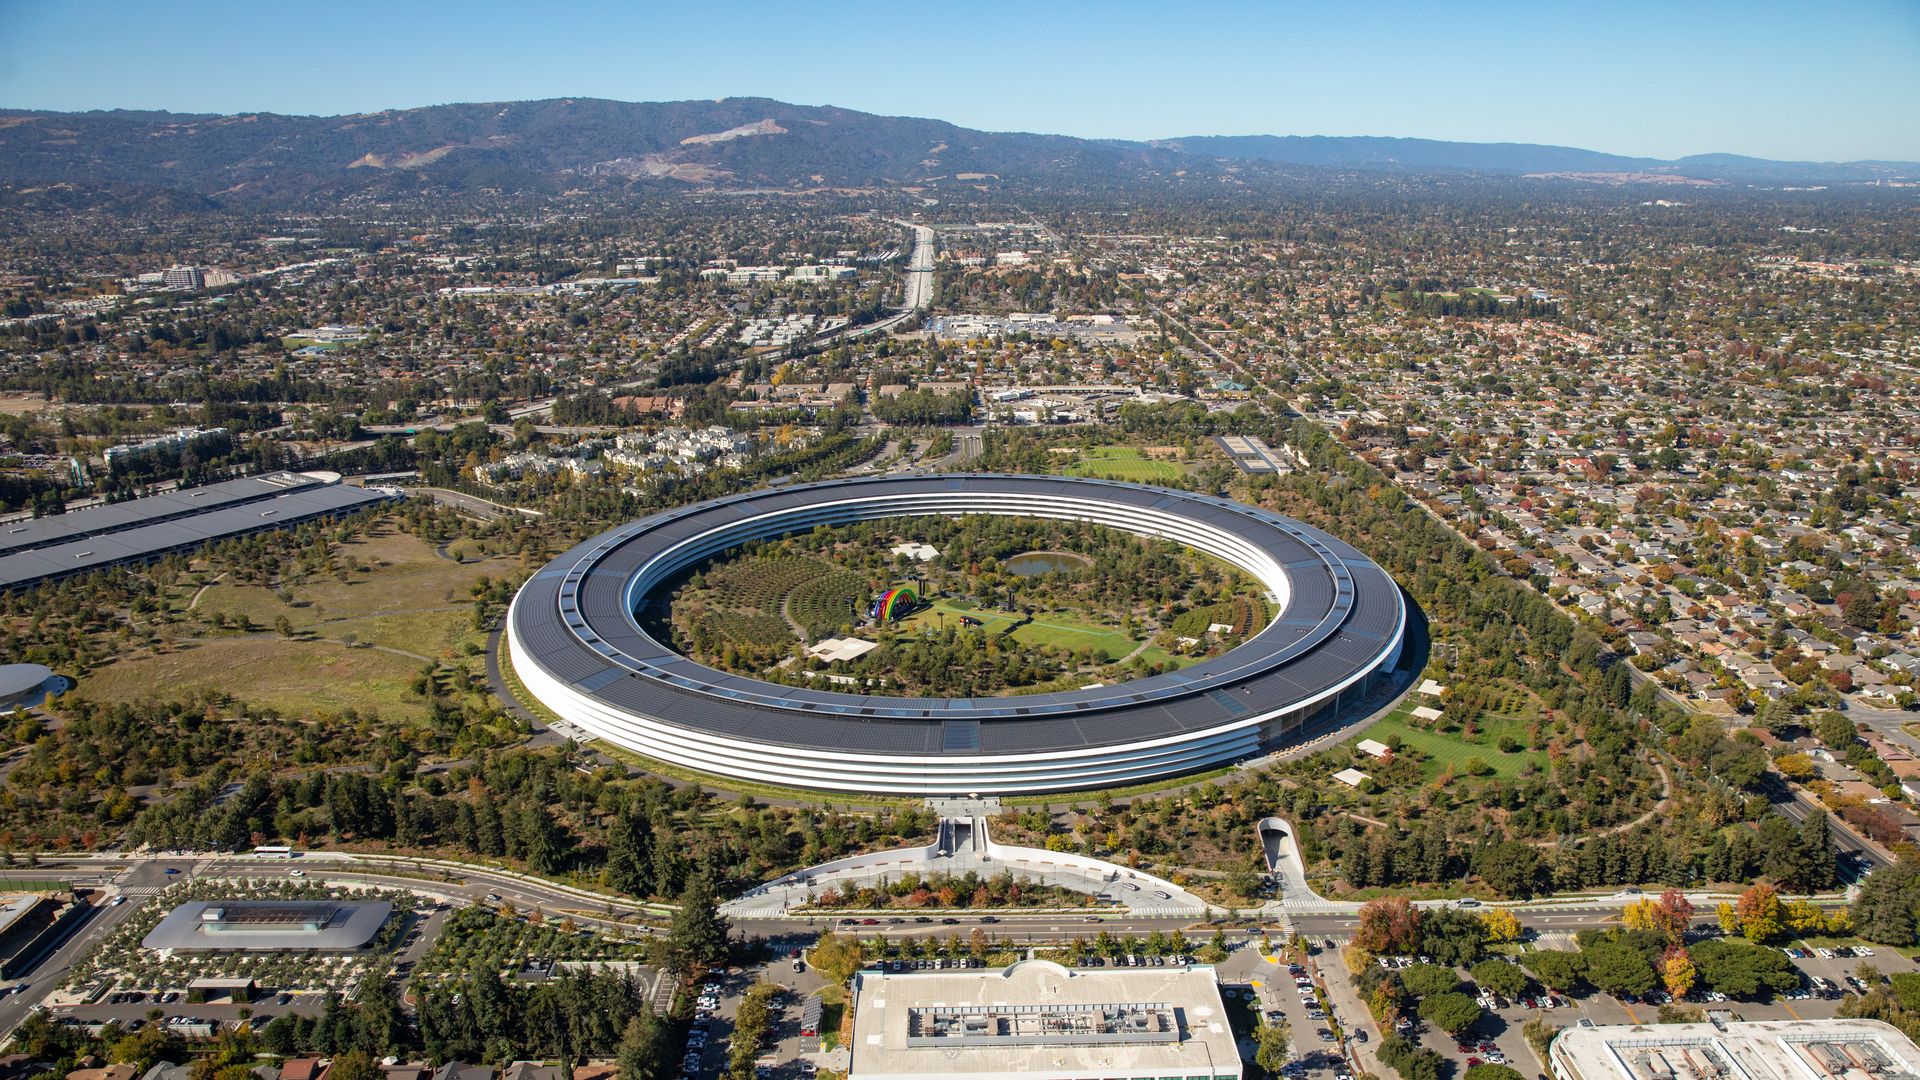 The Apple Park campus stands in this aerial photograph taken above Cupertino, California, U.S., on Wednesday, Oct. 23, 2019.